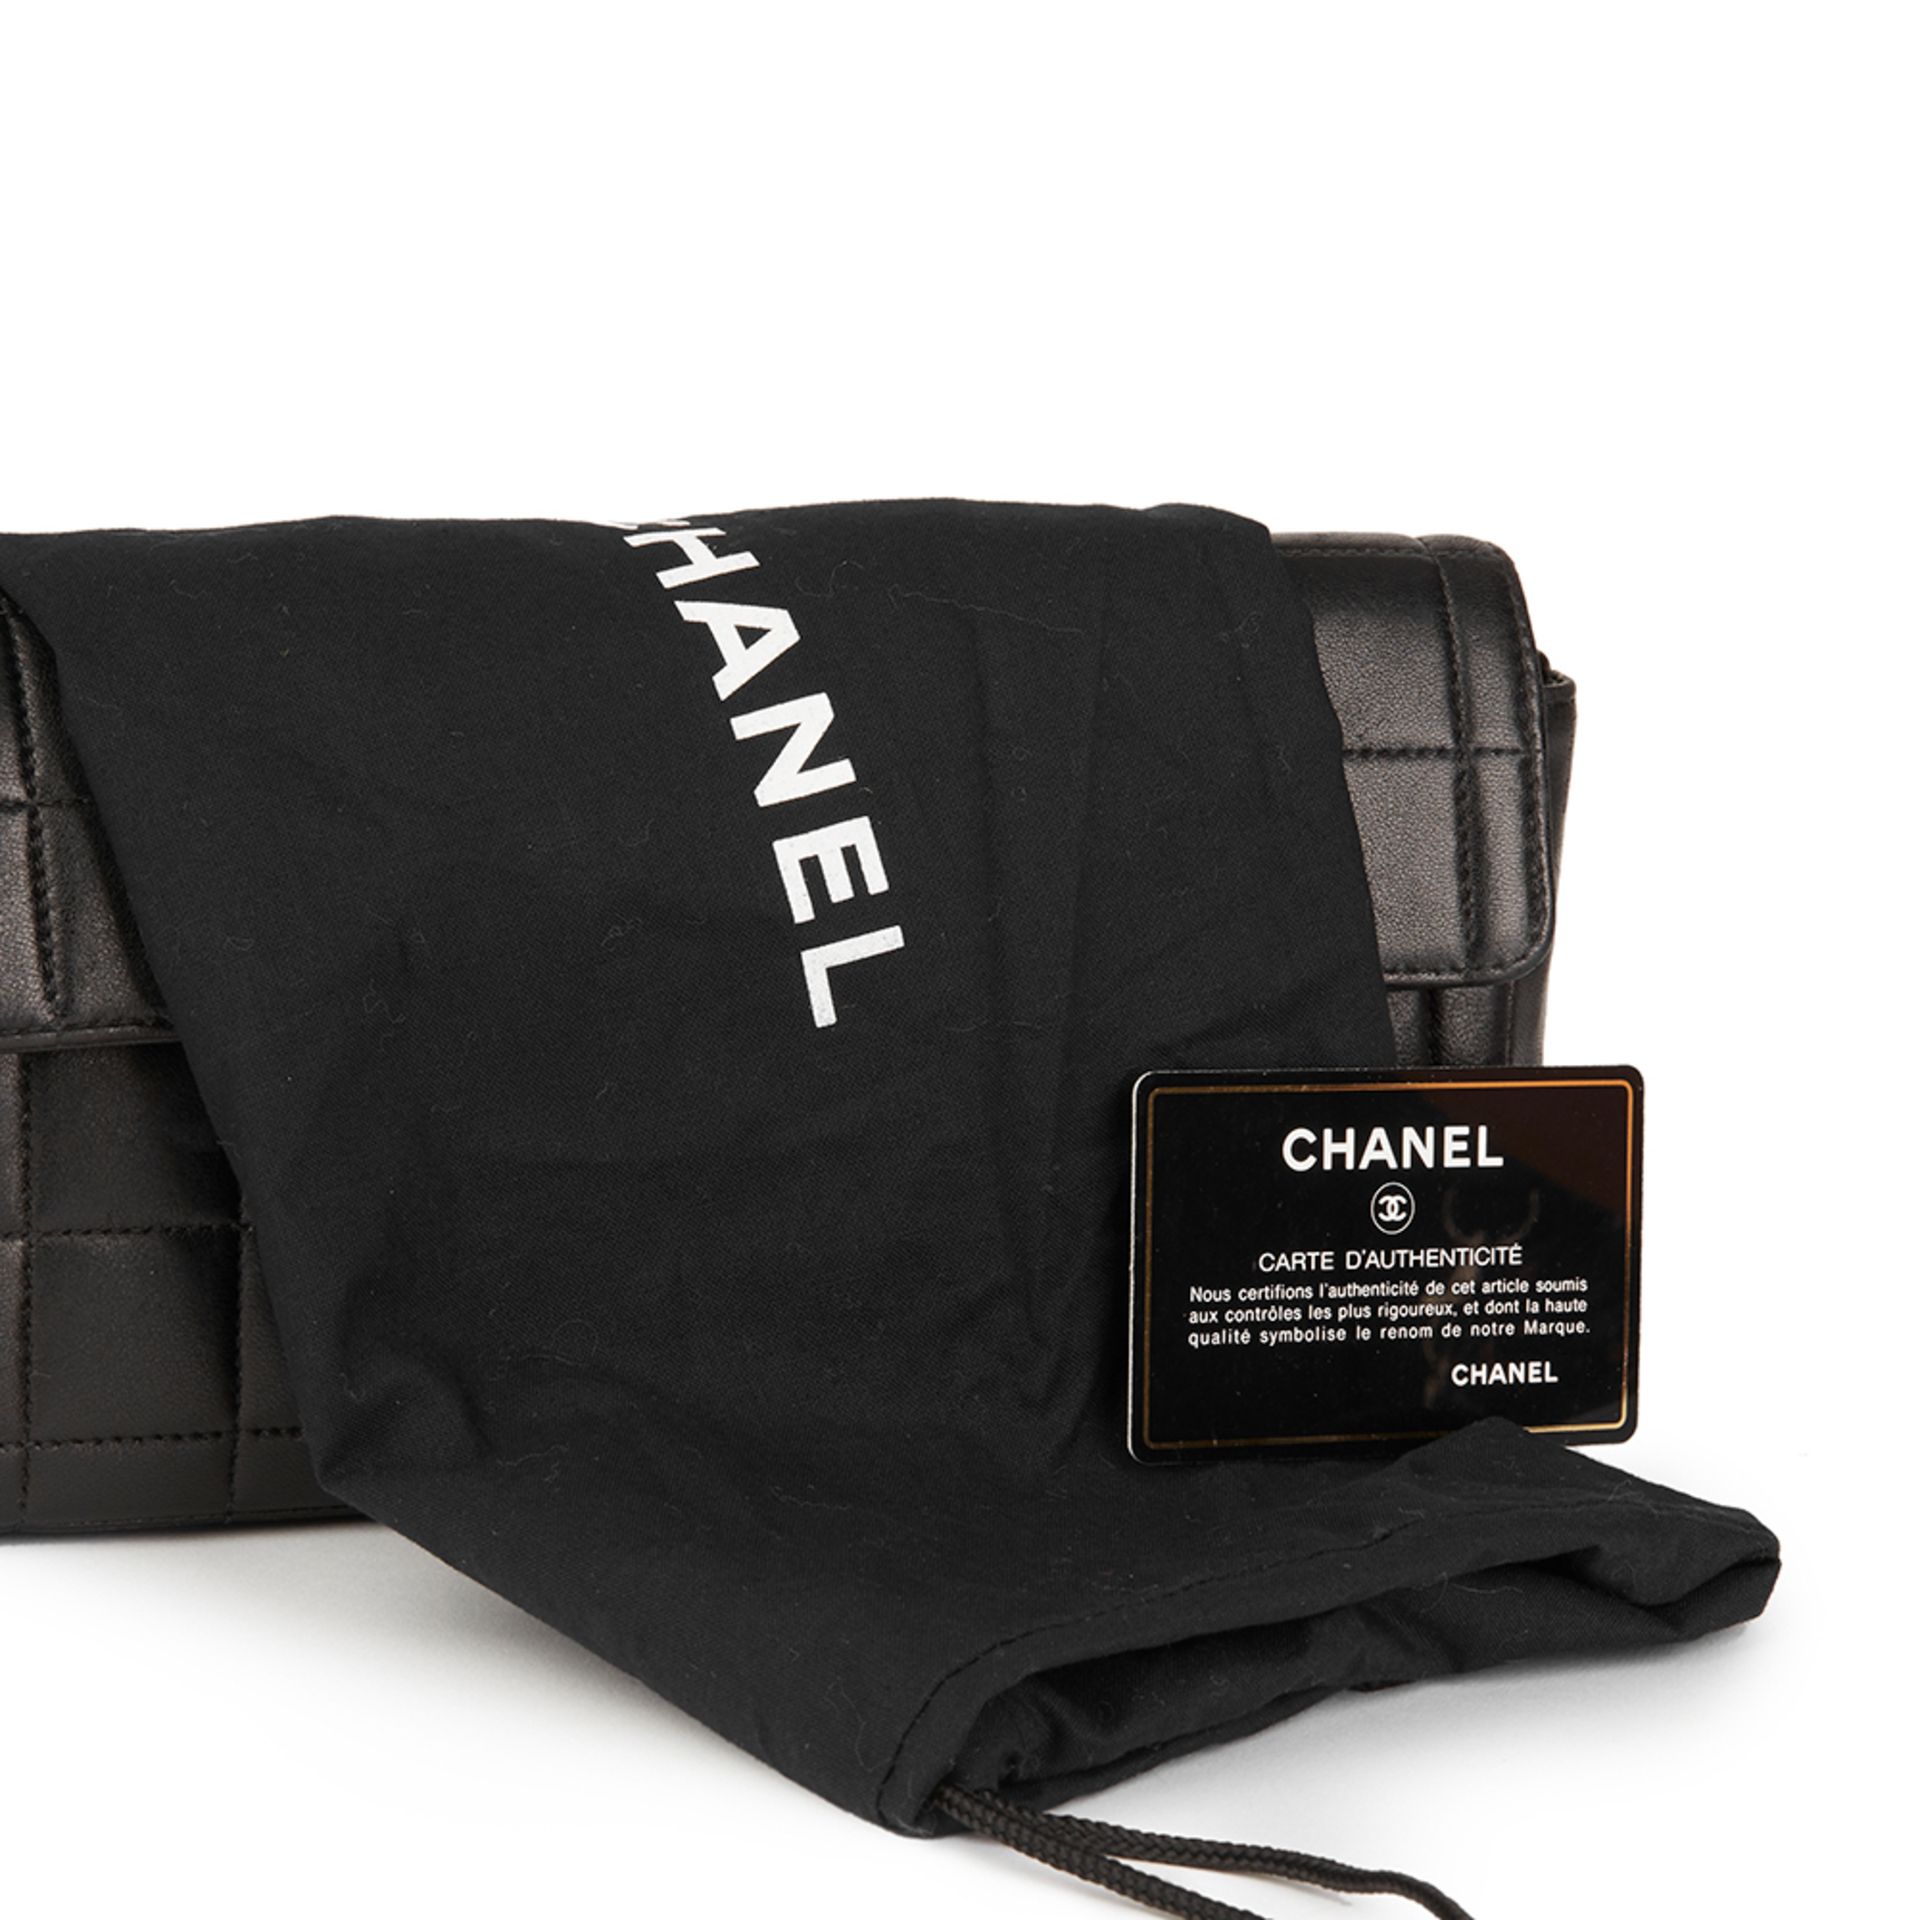 Chanel Black Quilted Lambskin East West Chocolate Bar Flap Bag - Image 9 of 11